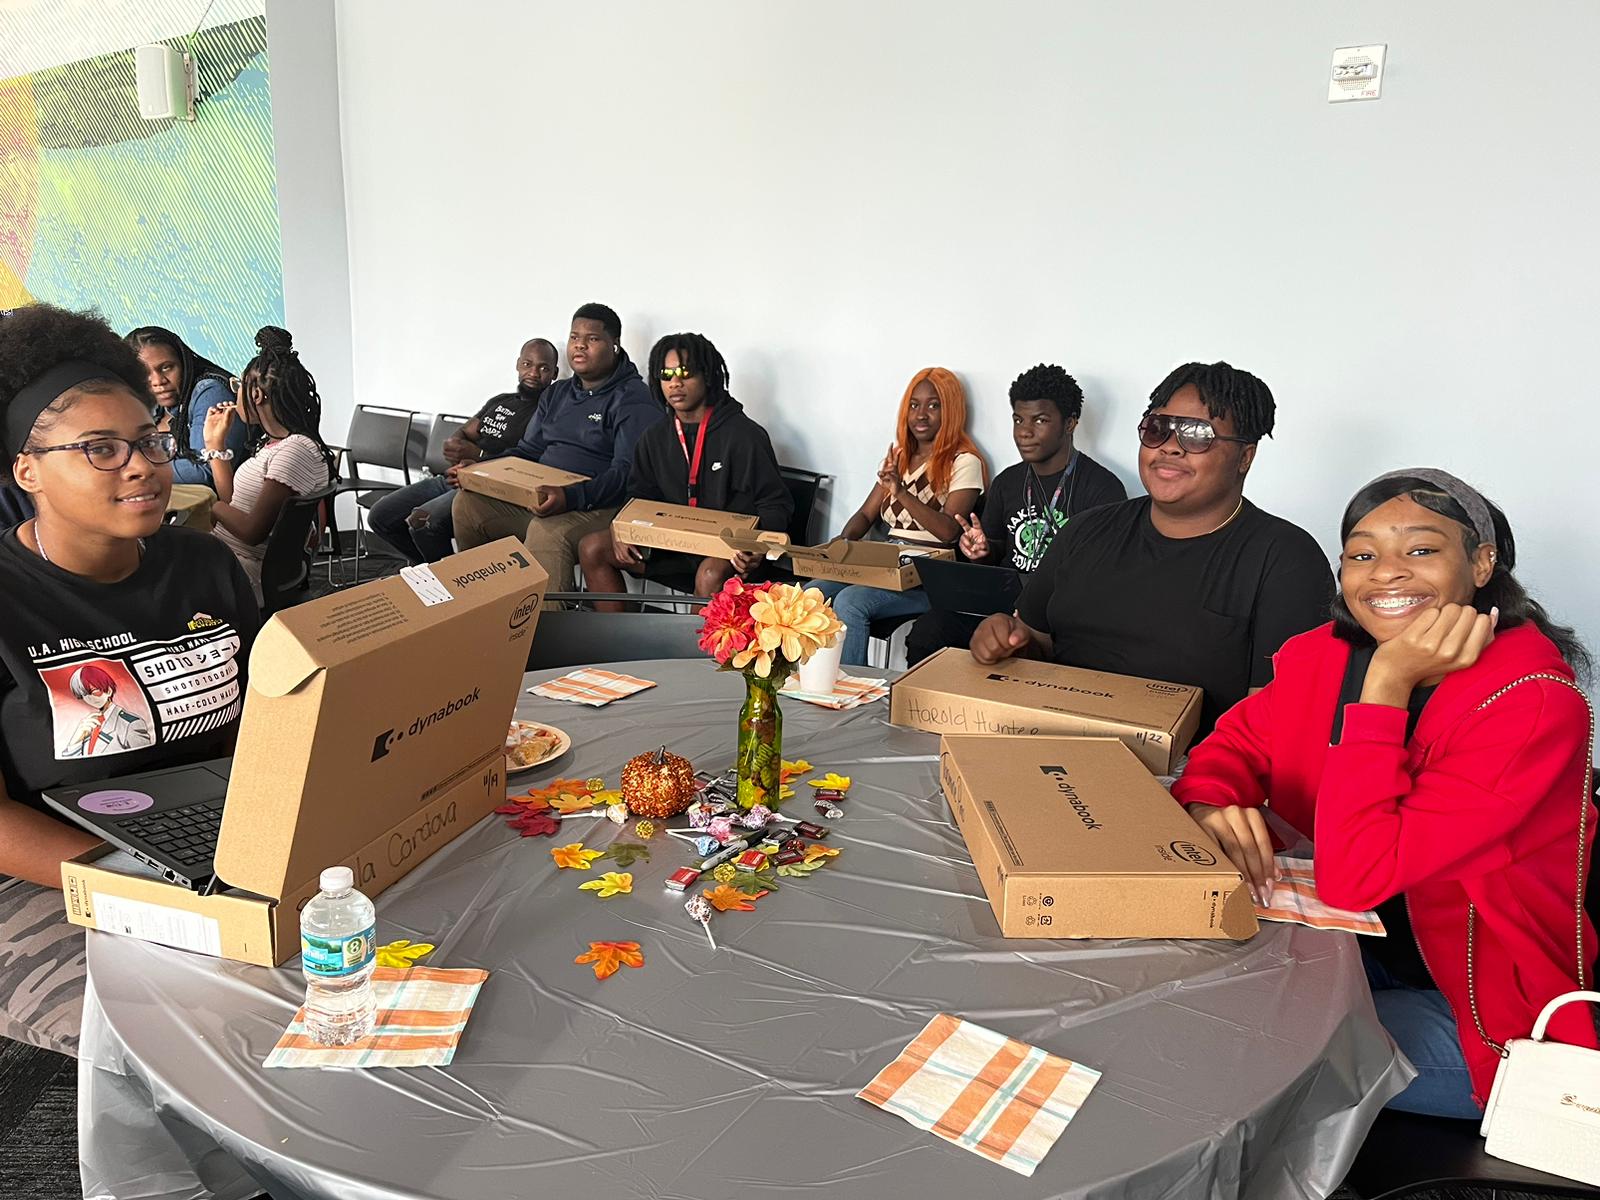 Our community partner and forever community champion Overtown Children & Youth Coalition (OCYC) provided OYC and Honey Shine youth with new laptops!